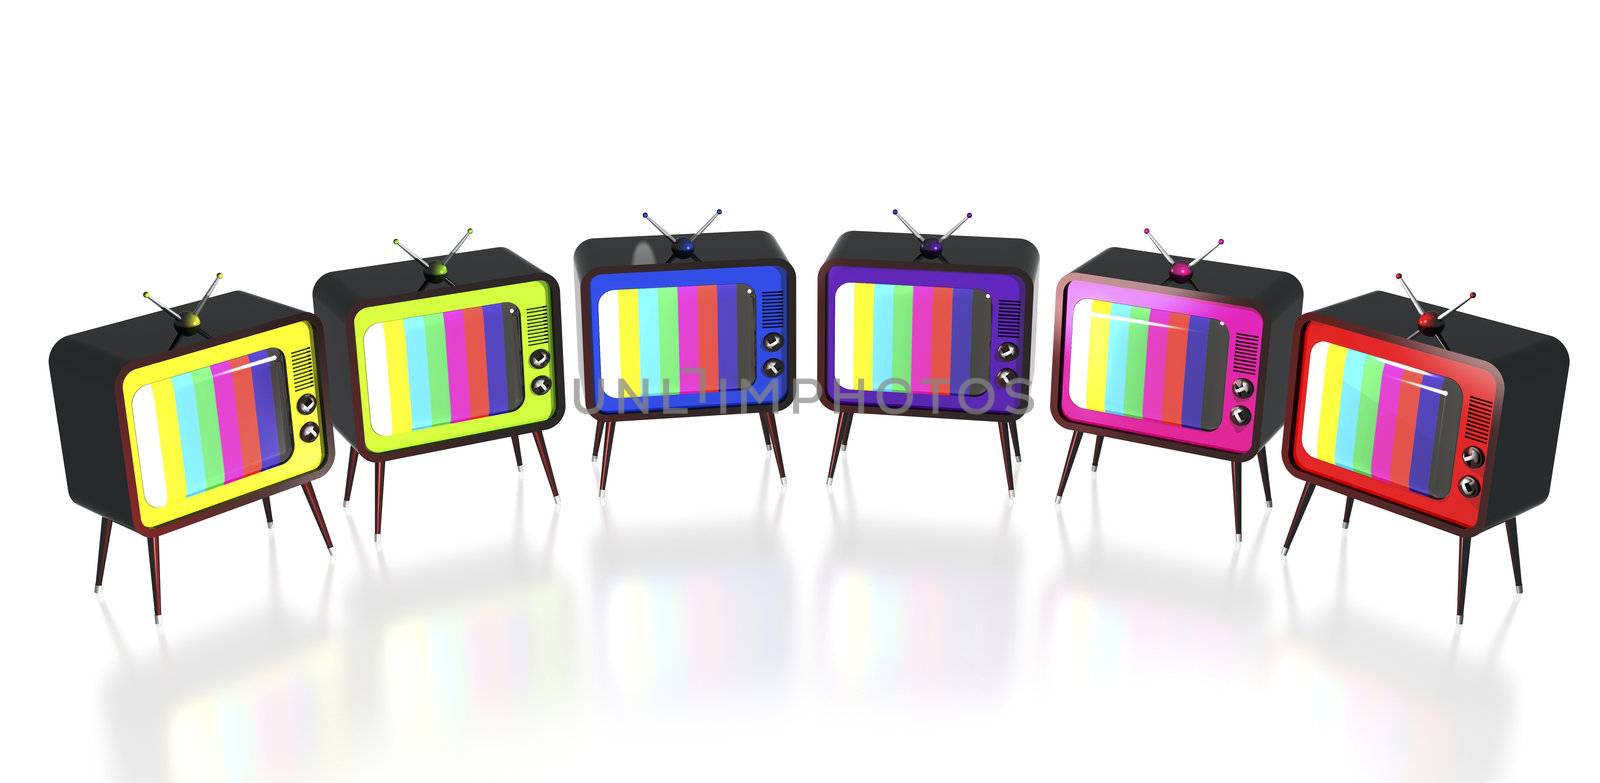 Set of colorful retro tv's arranged in row